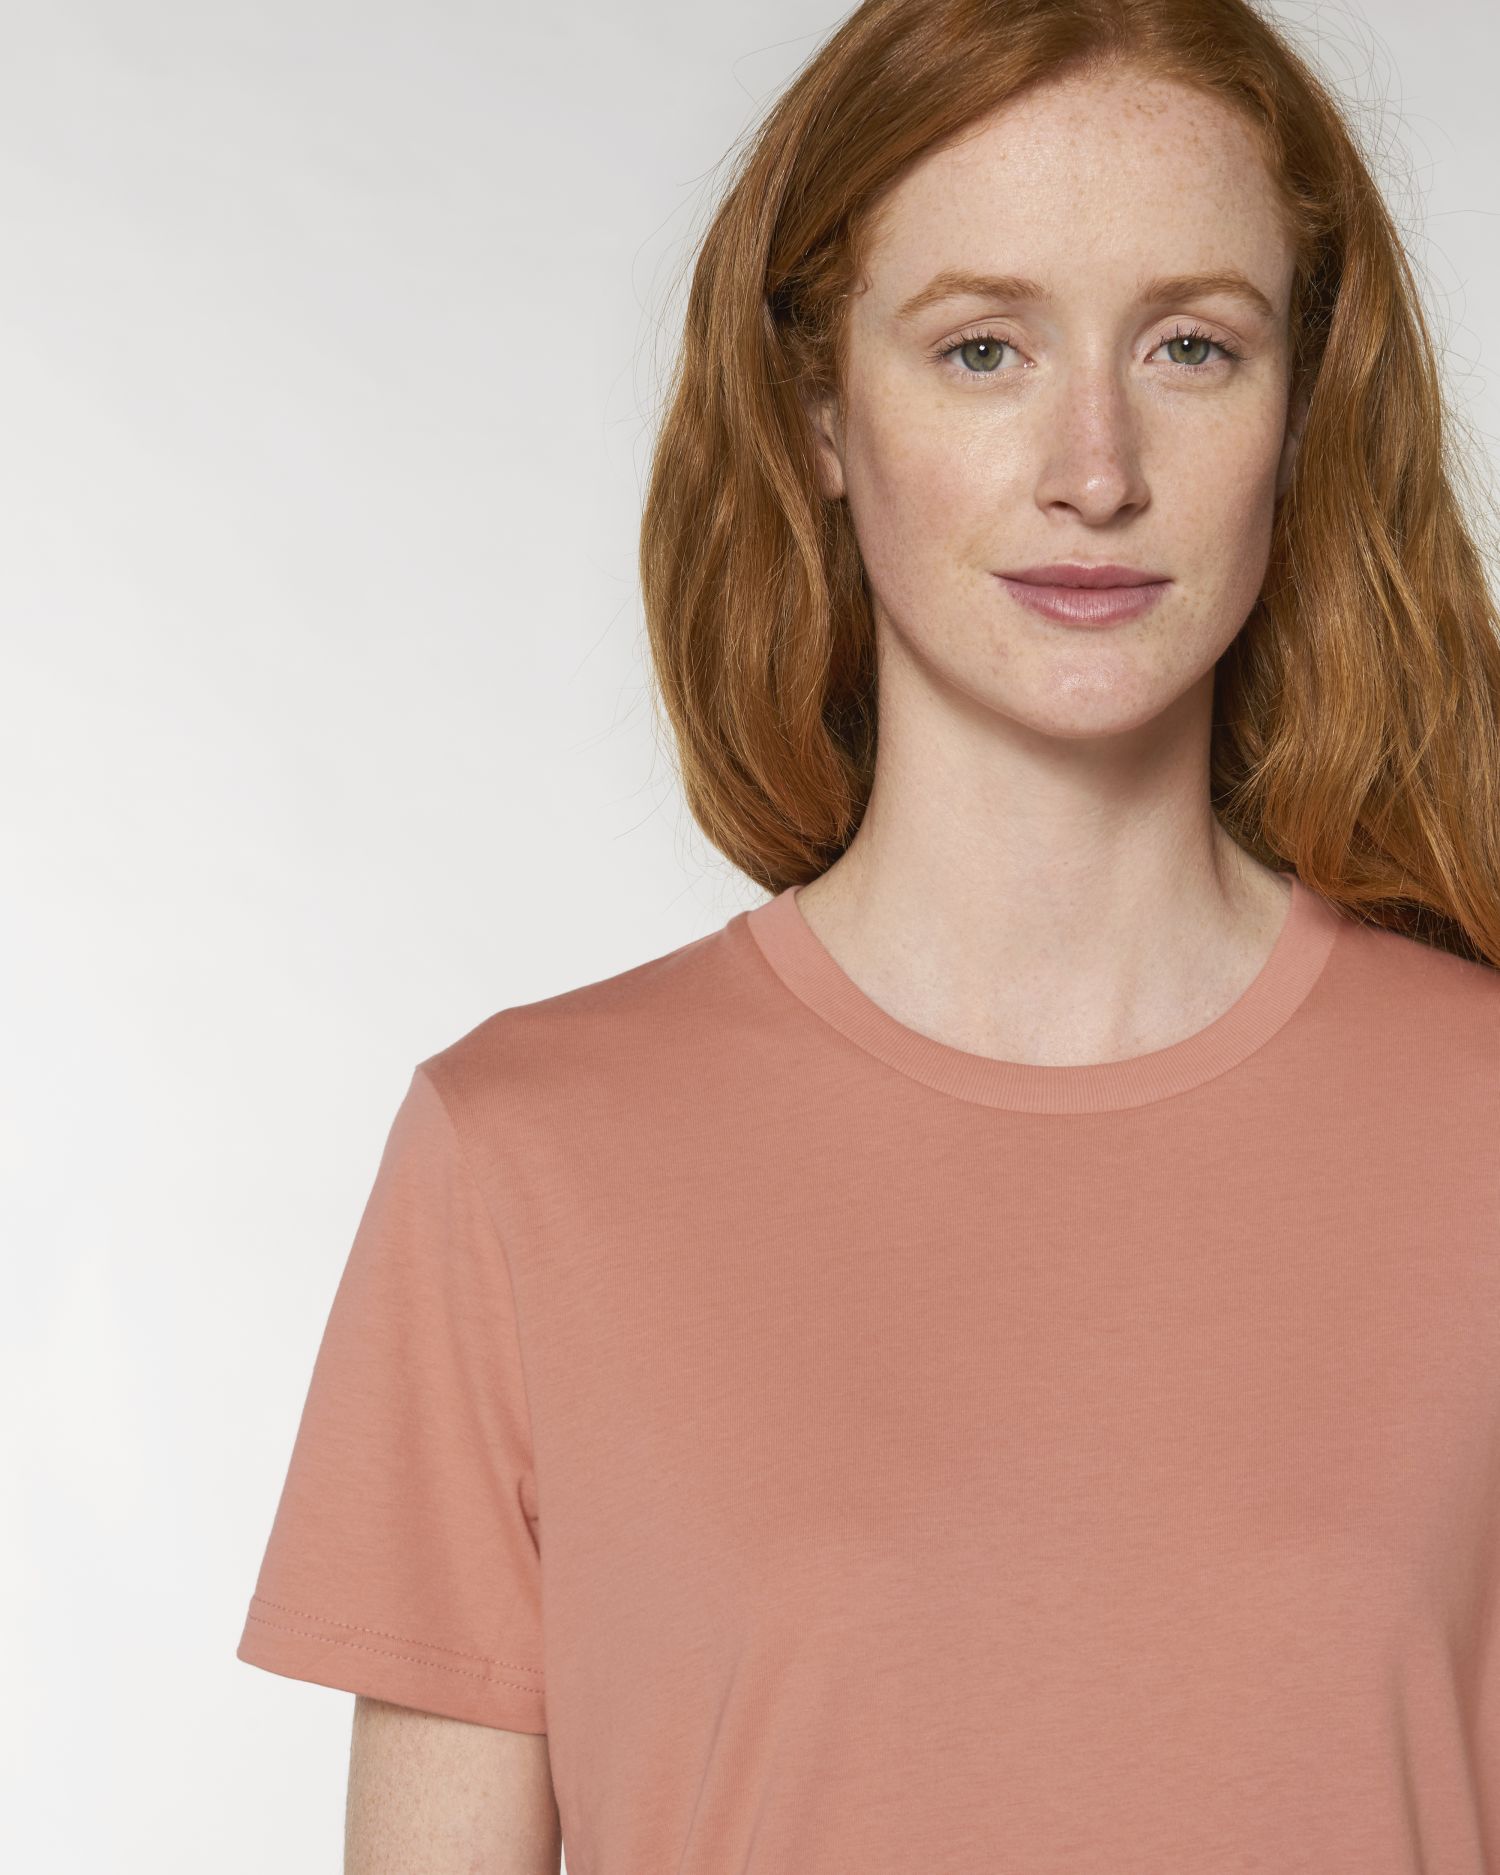 T-Shirt Creator in Farbe Rose Clay